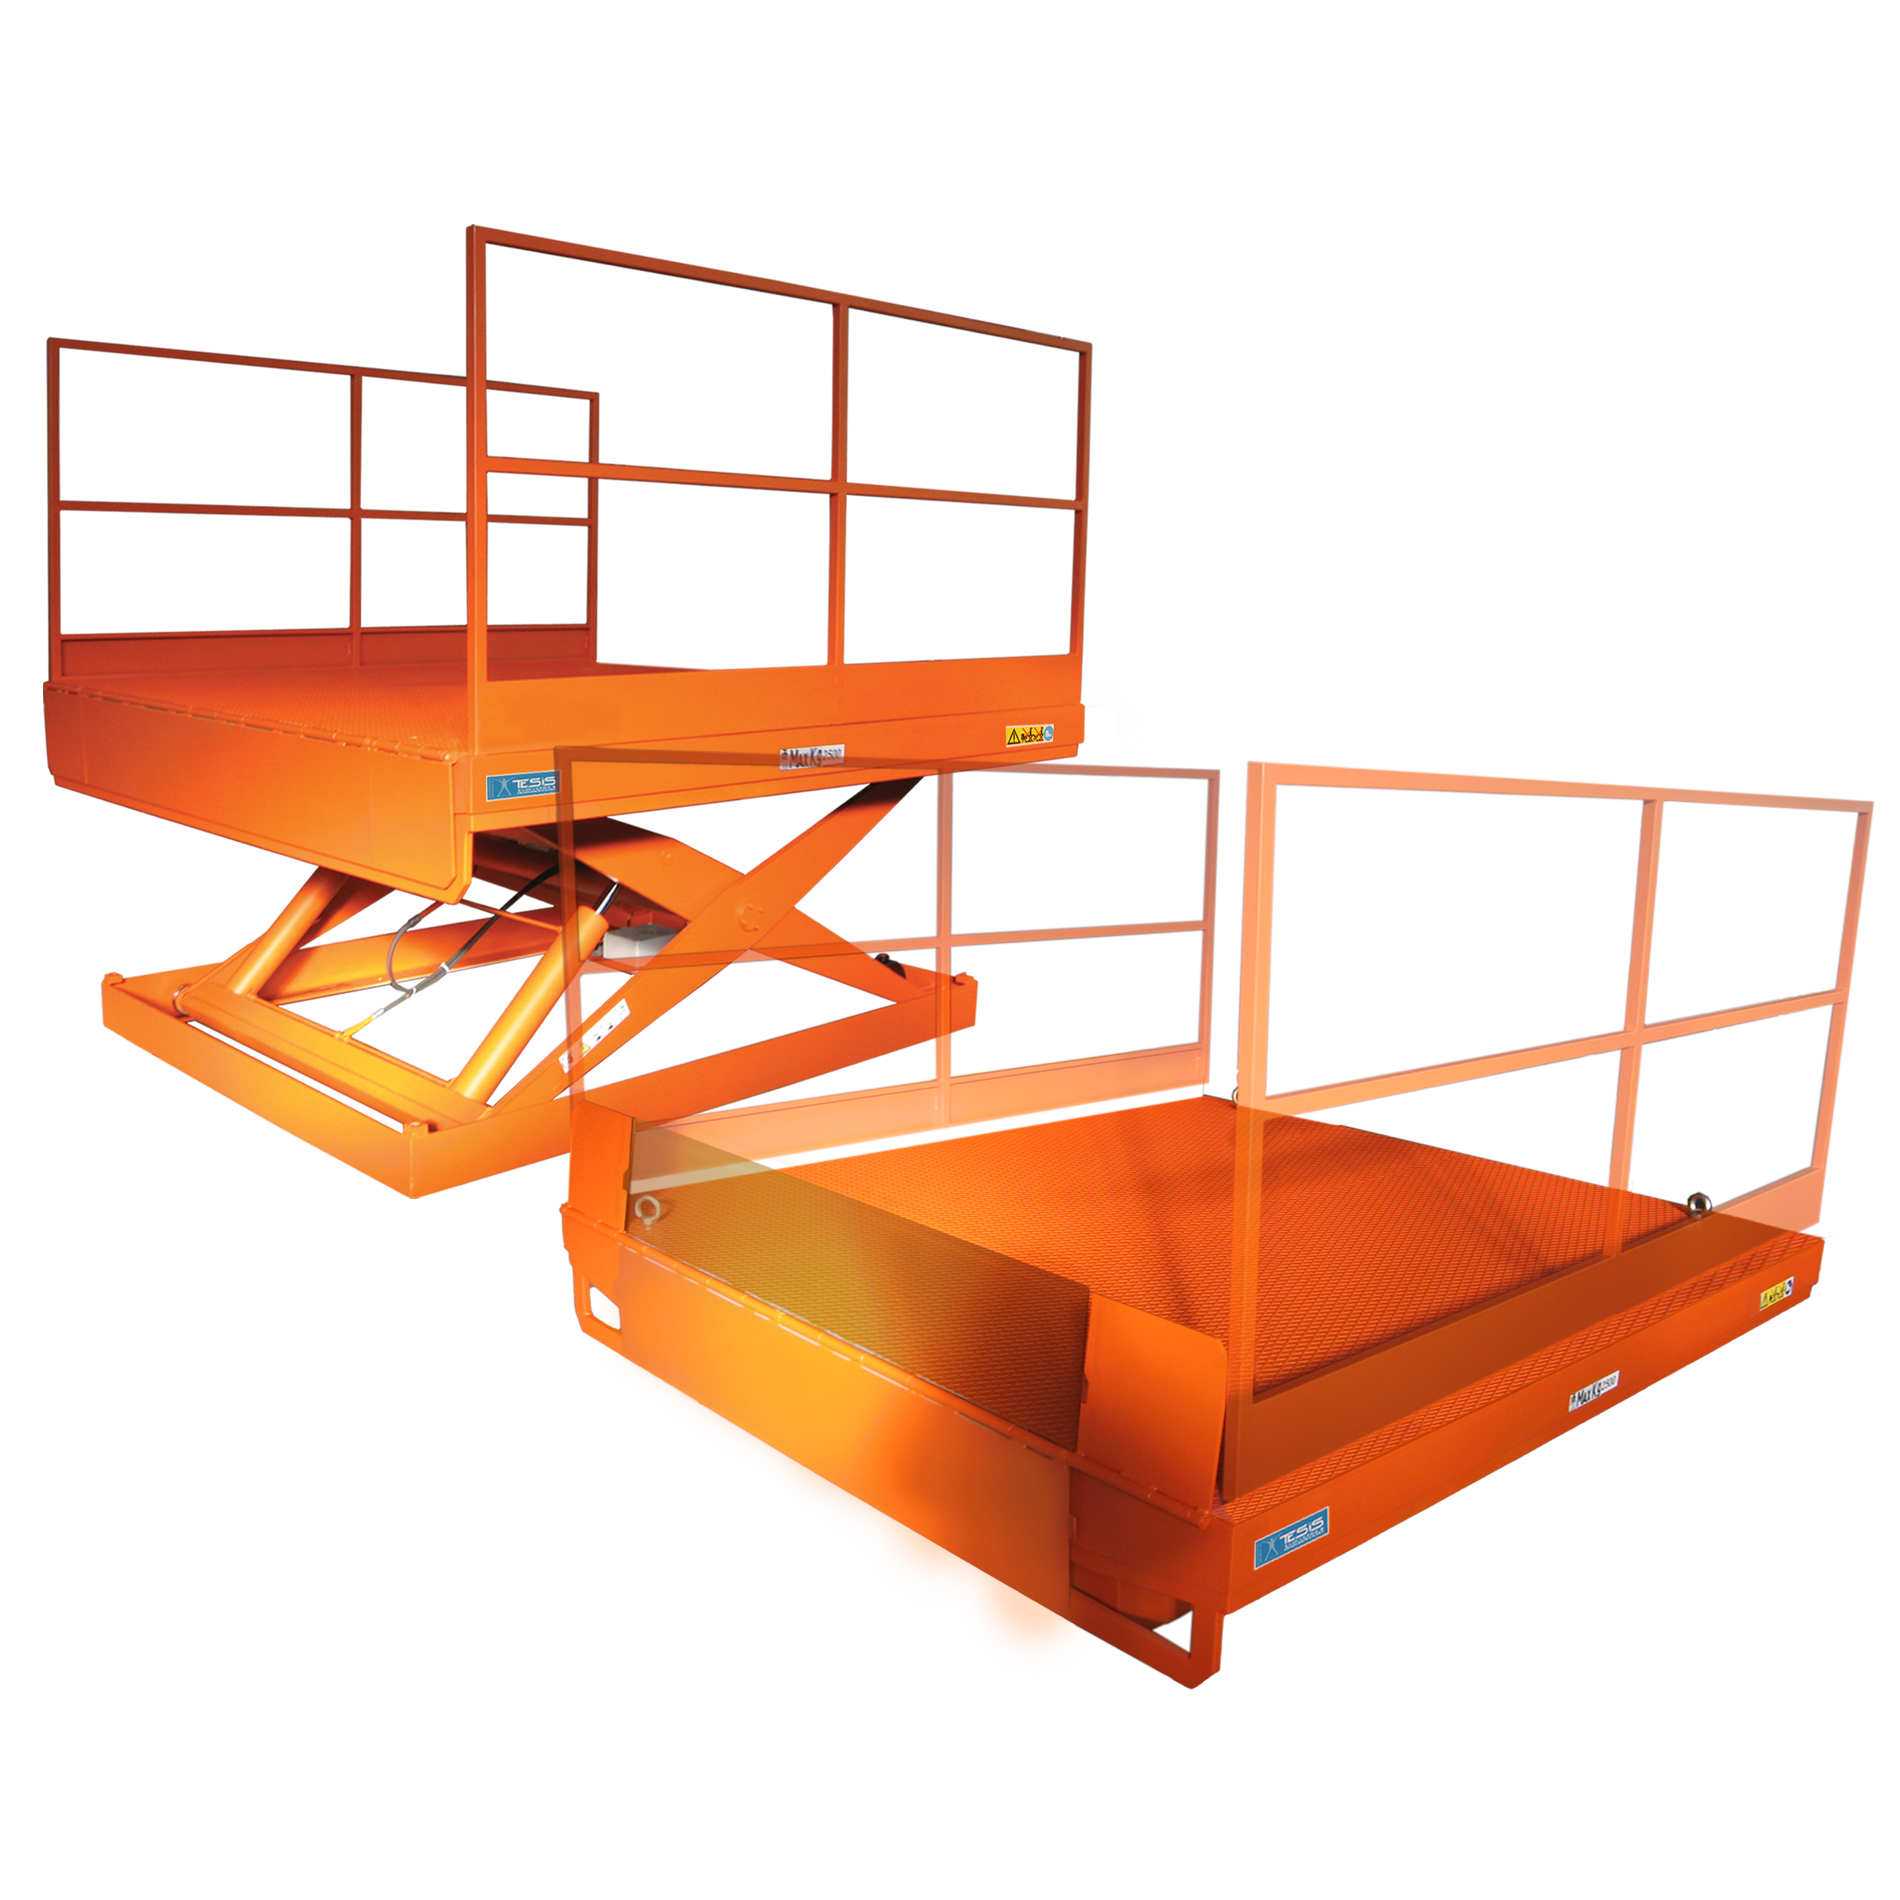 Truck loading dock lift with 3 split approach ramp and removable guardrails, loading dock lifting platforms, loading dock lift systems, scissor dock lifts, truck loading lift tables, scissor lift dock levellers